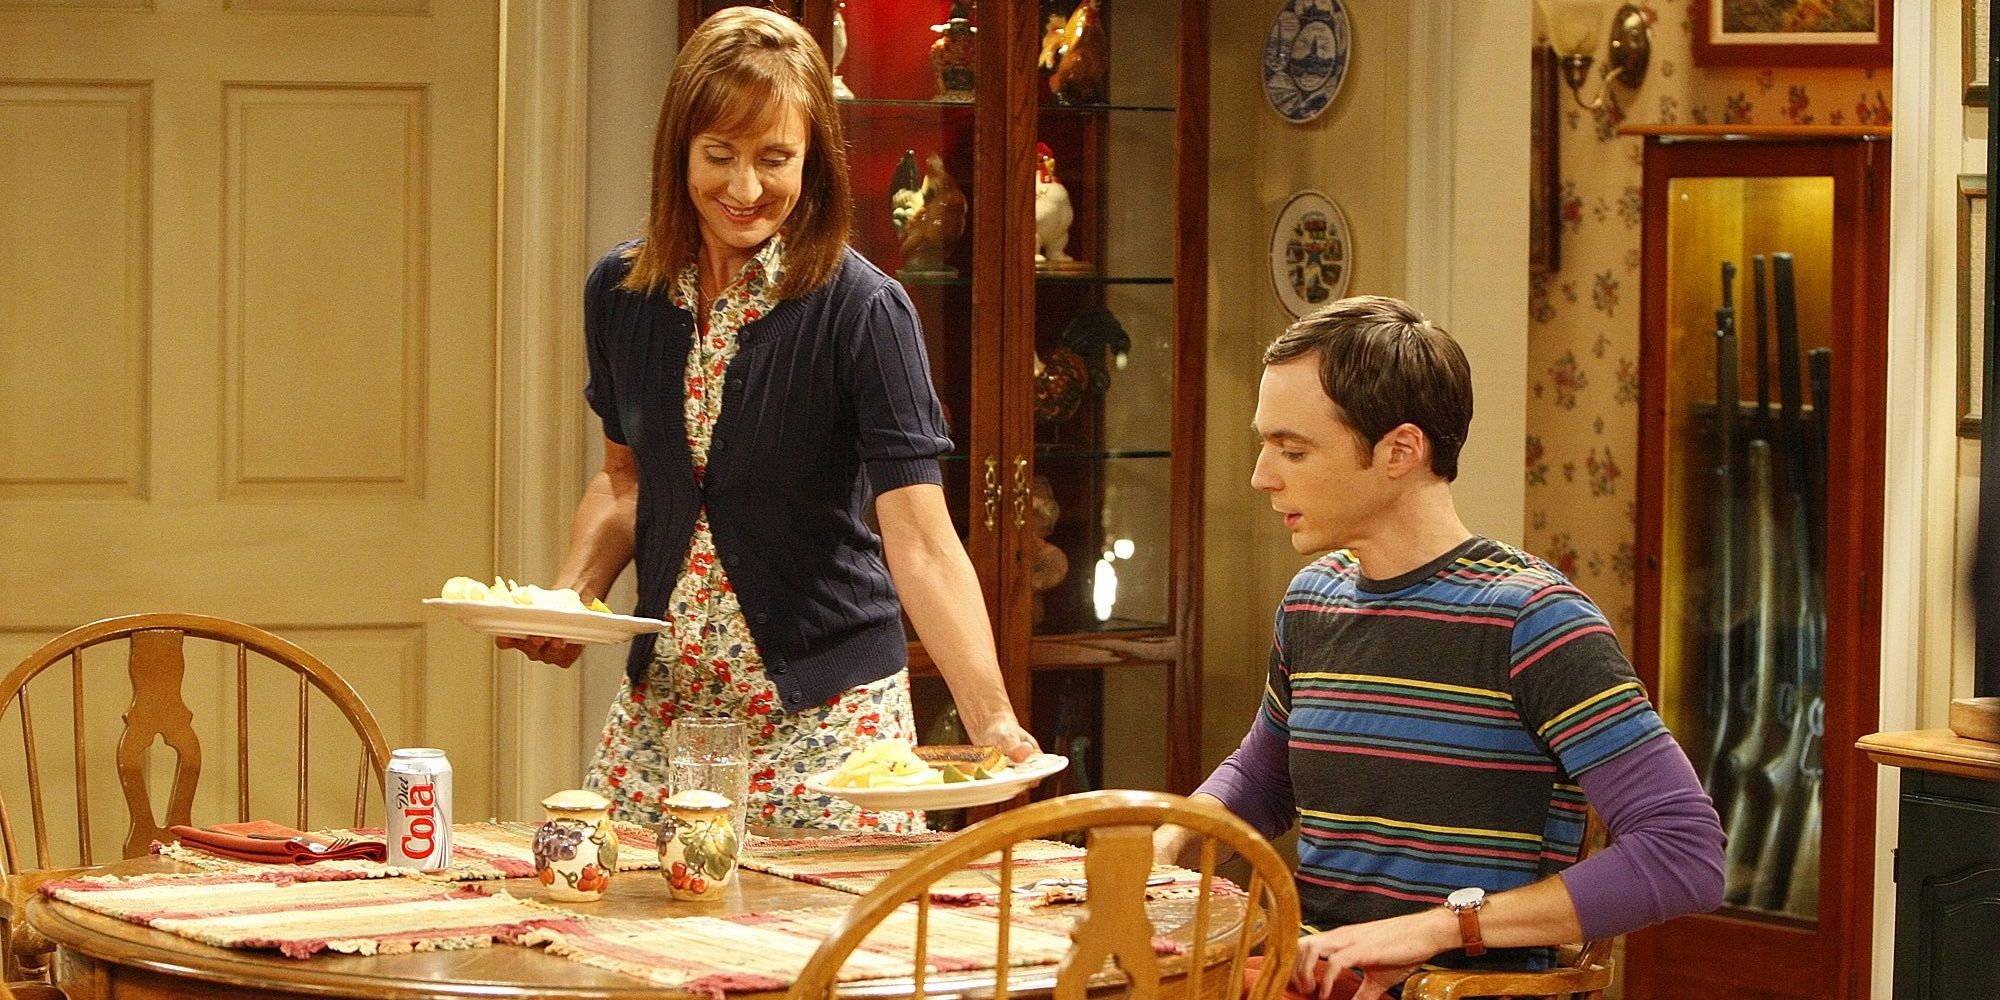 Mary serves Sheldon a meal in The Big Bang Theory